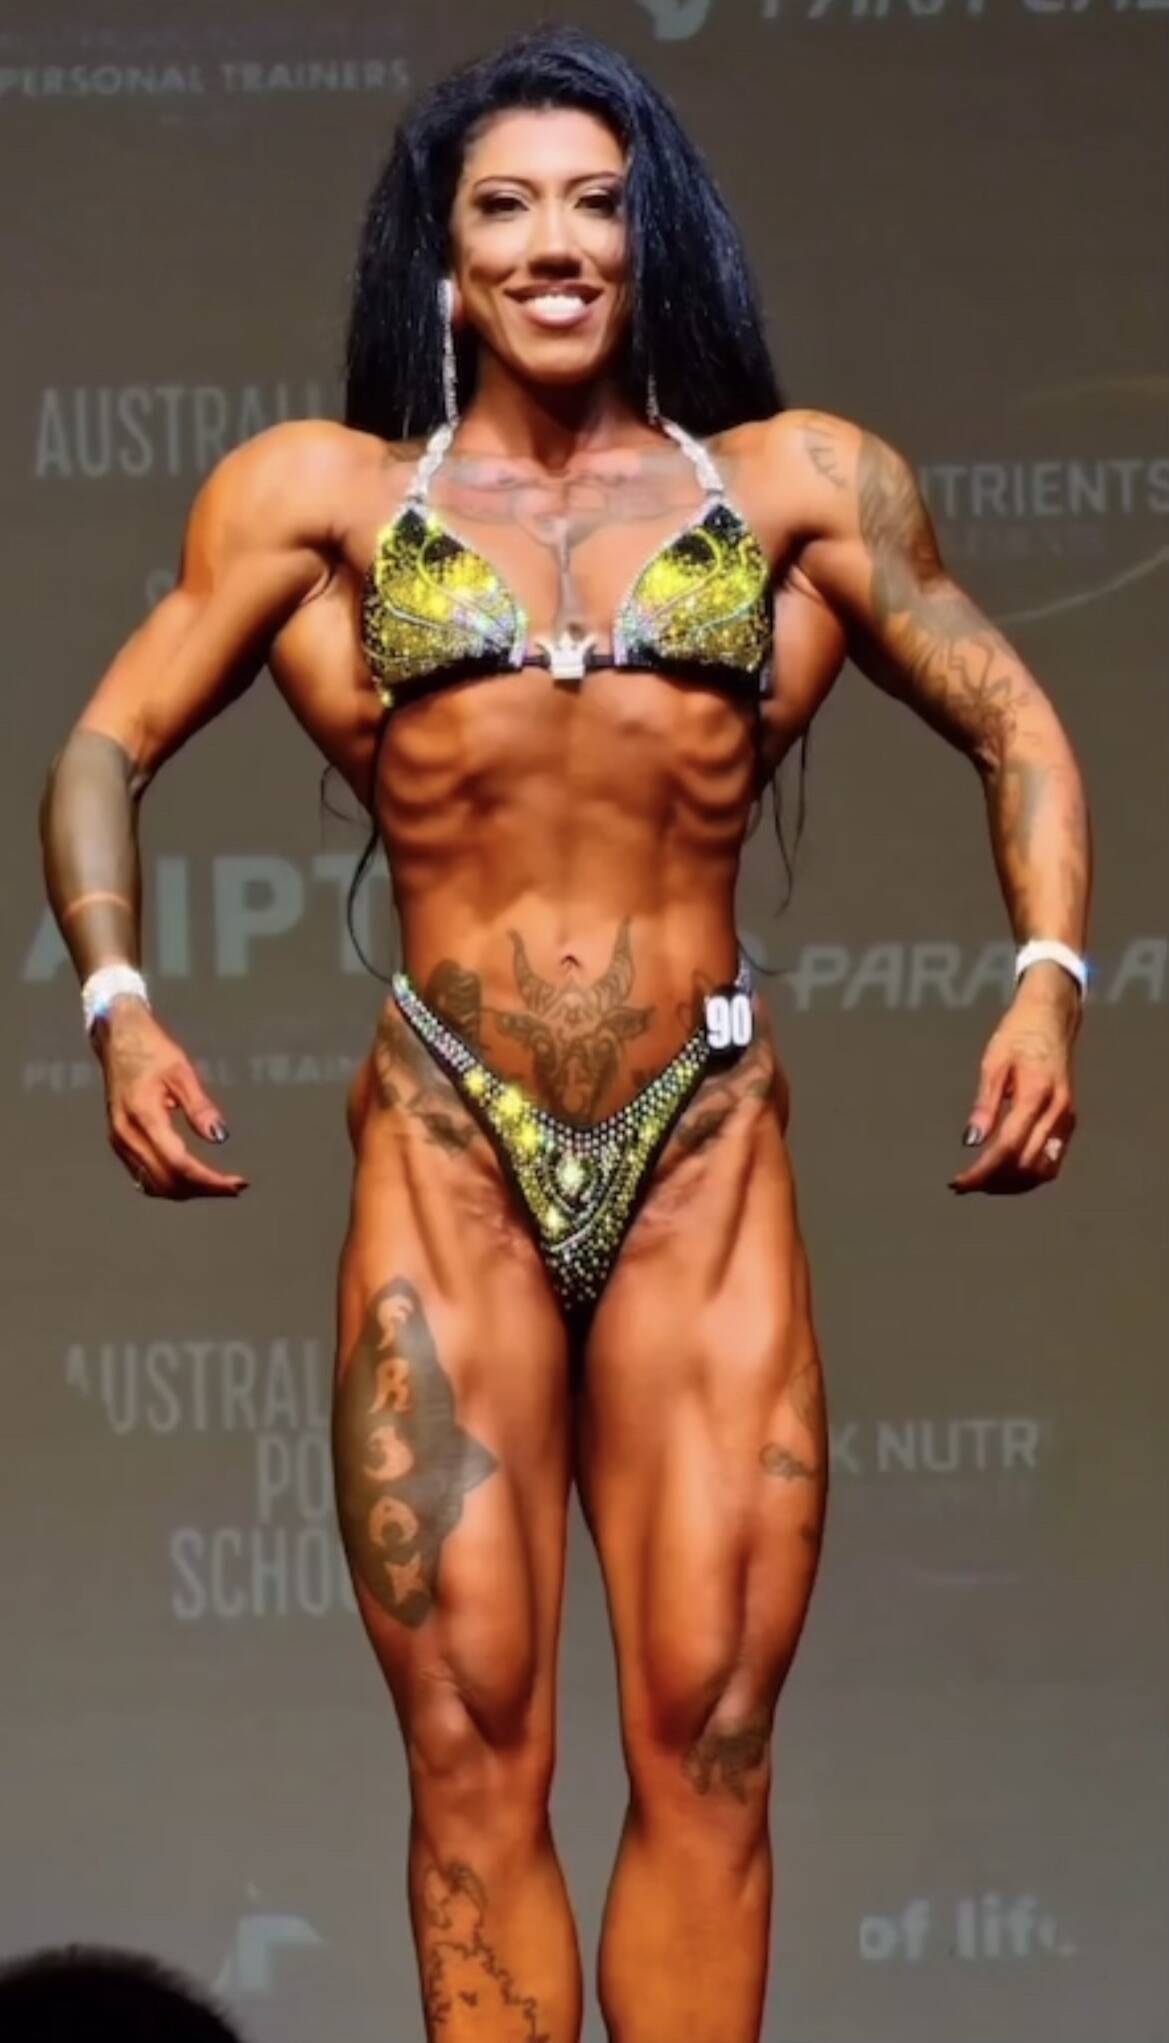 NSW figure champion Seville Ford takes home gold and silver